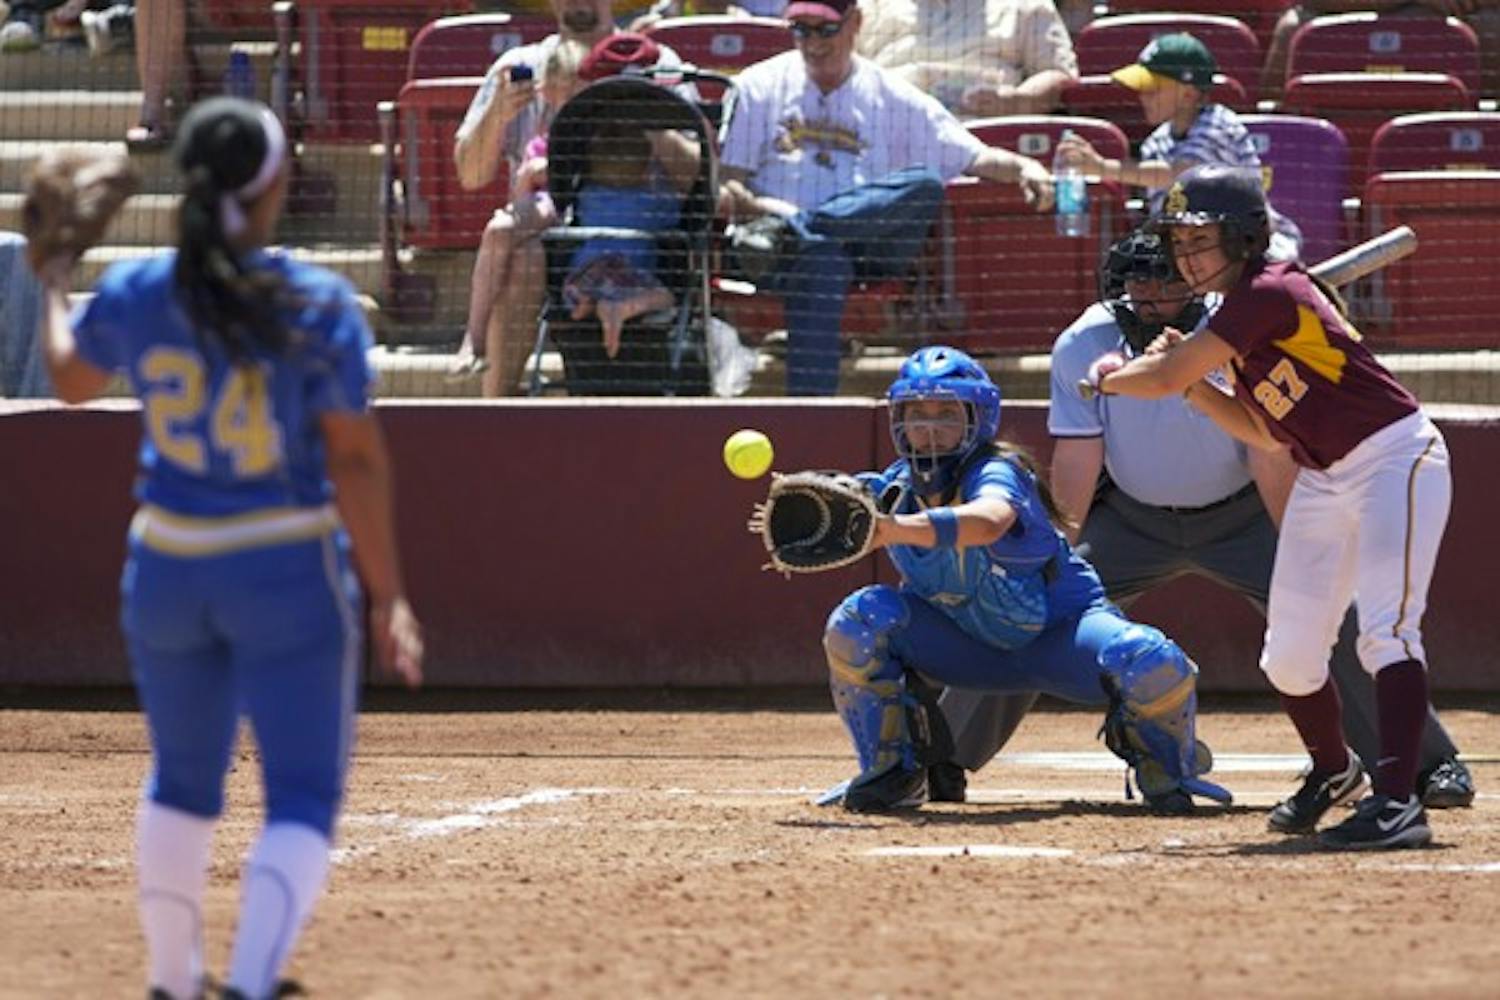 Still on Top: ASU senior catcher Kaylyn Castillo prepares to smack a pitch from UCLA junior pitcher Macon Aleah on Sunday in Tempe. The Sun Devils moved down one spot in the national rankings to No. 2, but still remain the top team in the Pac-10. (Photo by Scott Stuk)